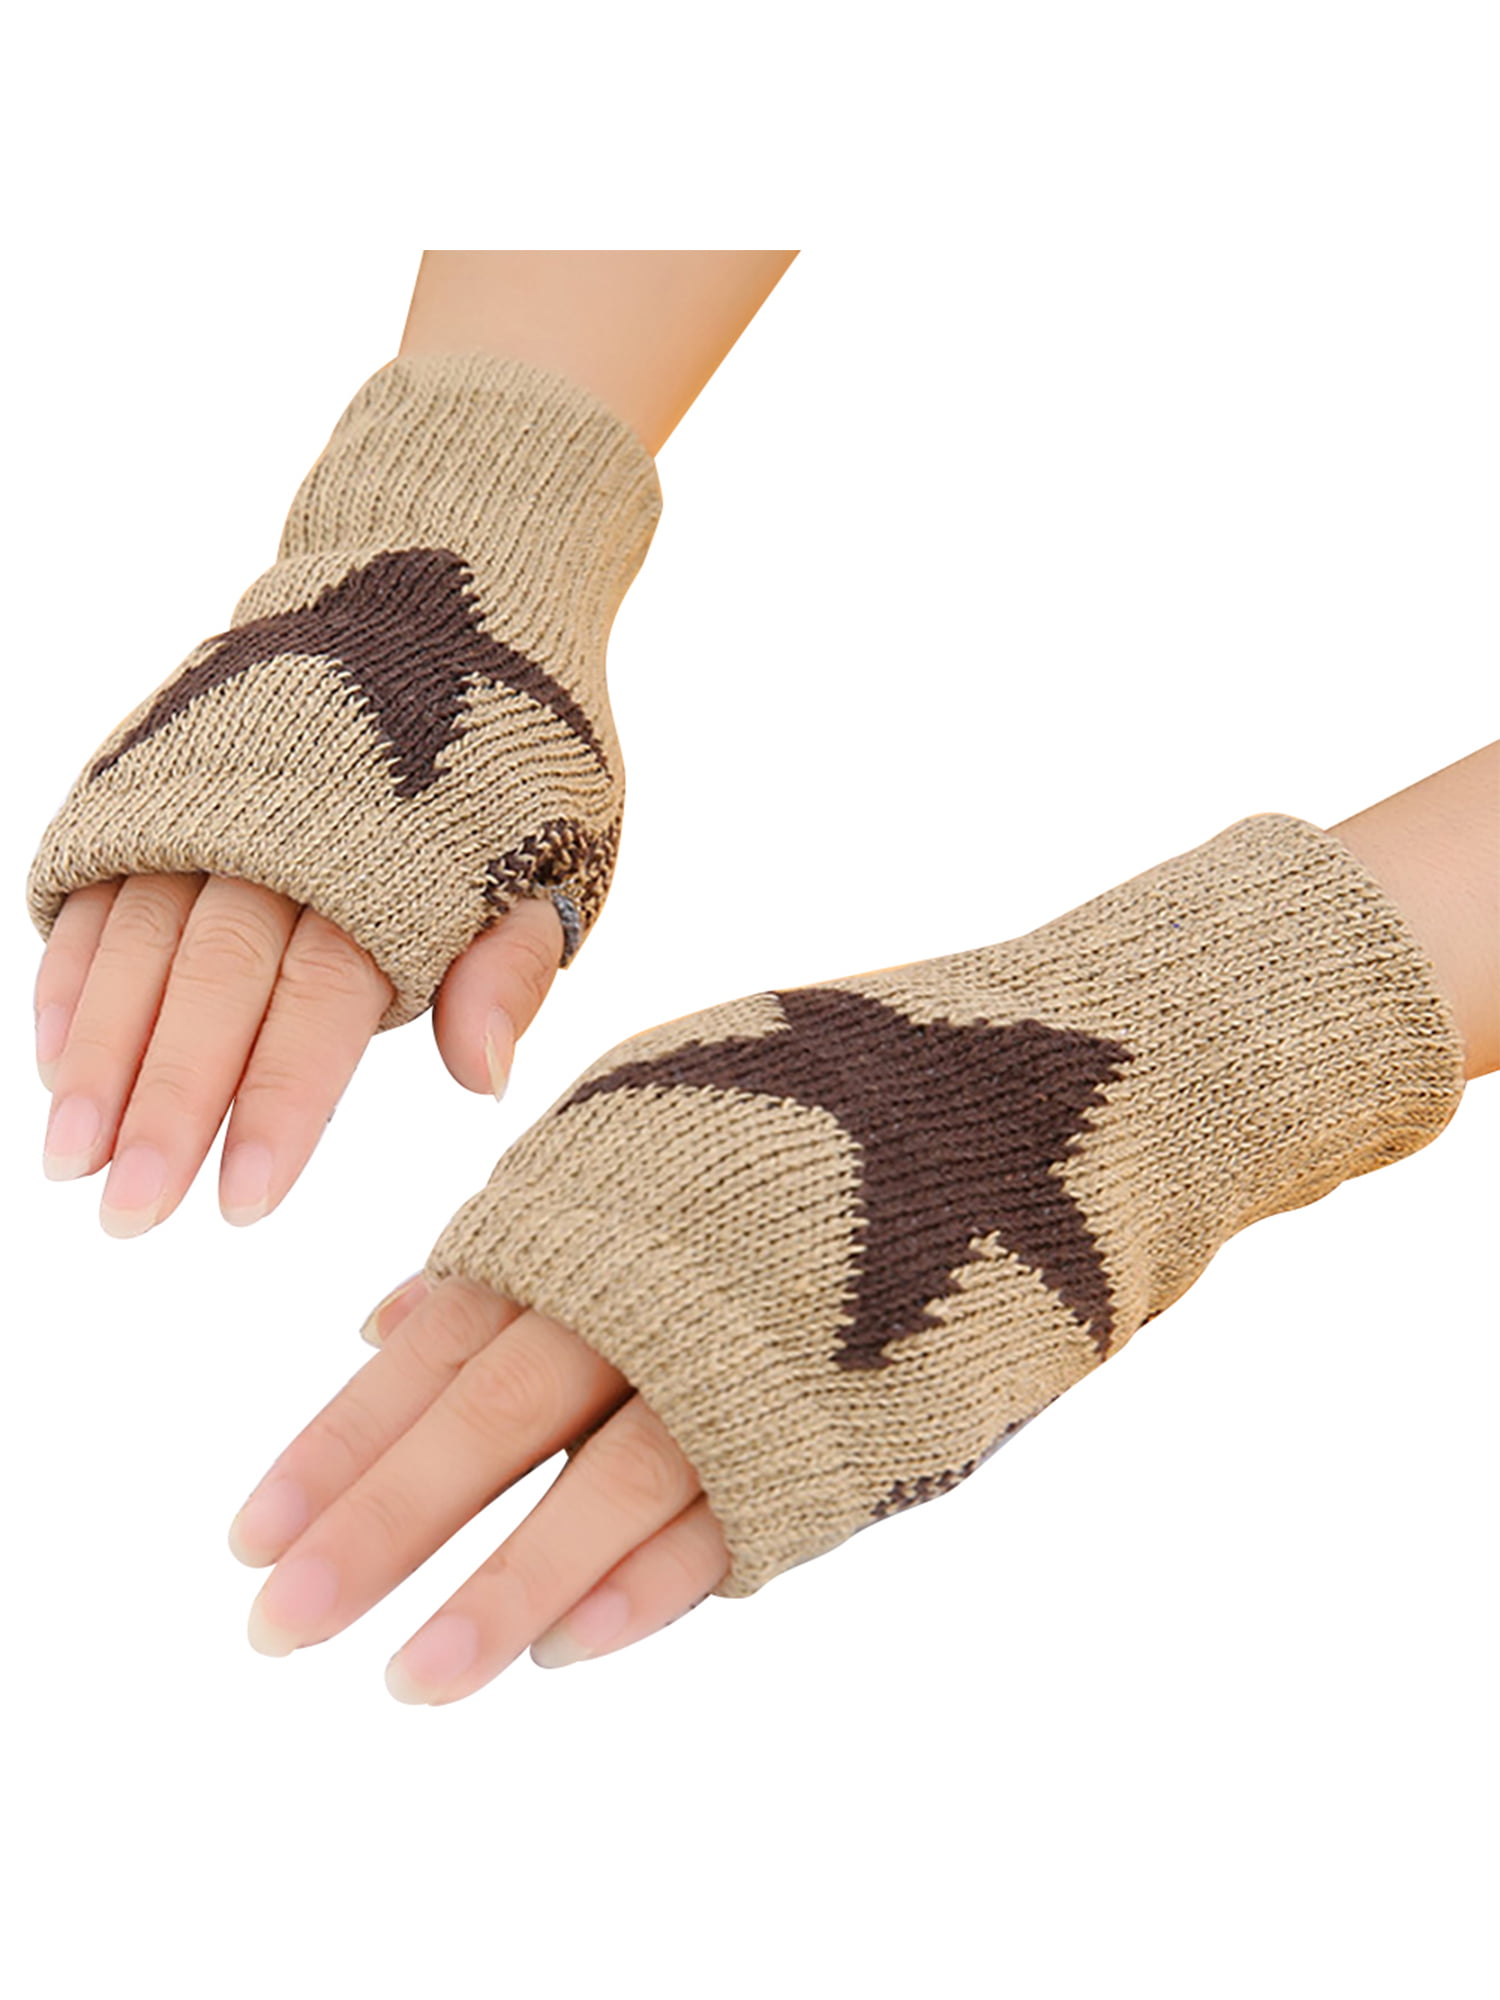 Great Gift! fingerless gloves convertible luxury cashmere mittens Cashmere Oatmeal Beige Mittens texting gloves